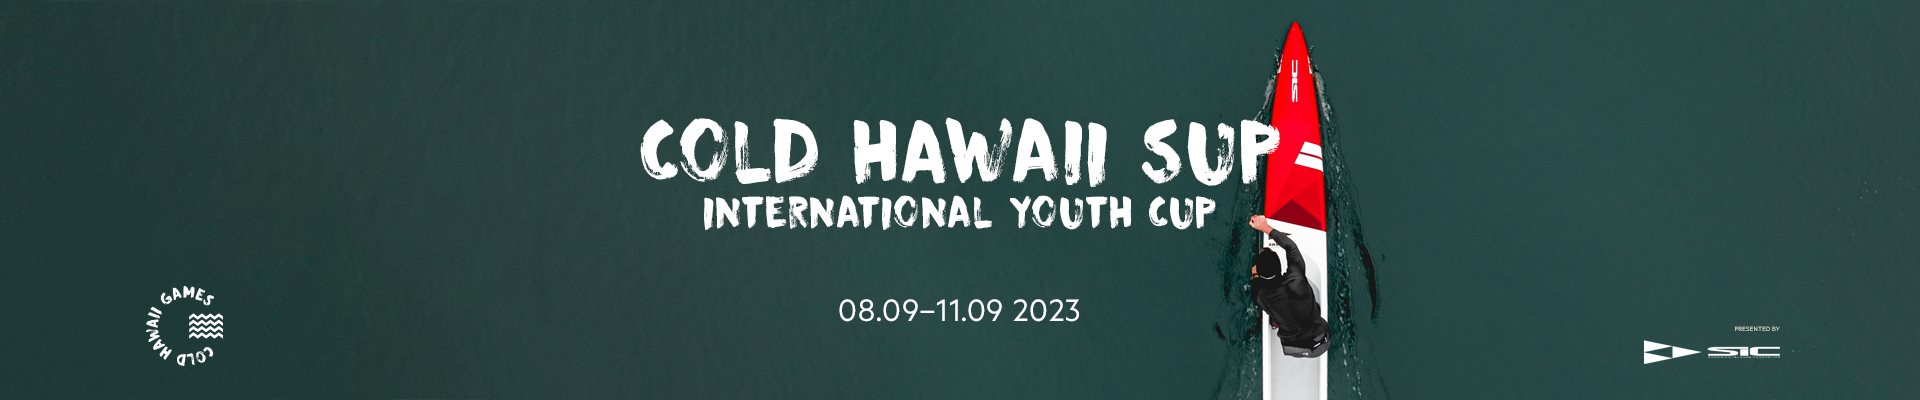 Cold Hawaii SUP International Youth CUP 2023